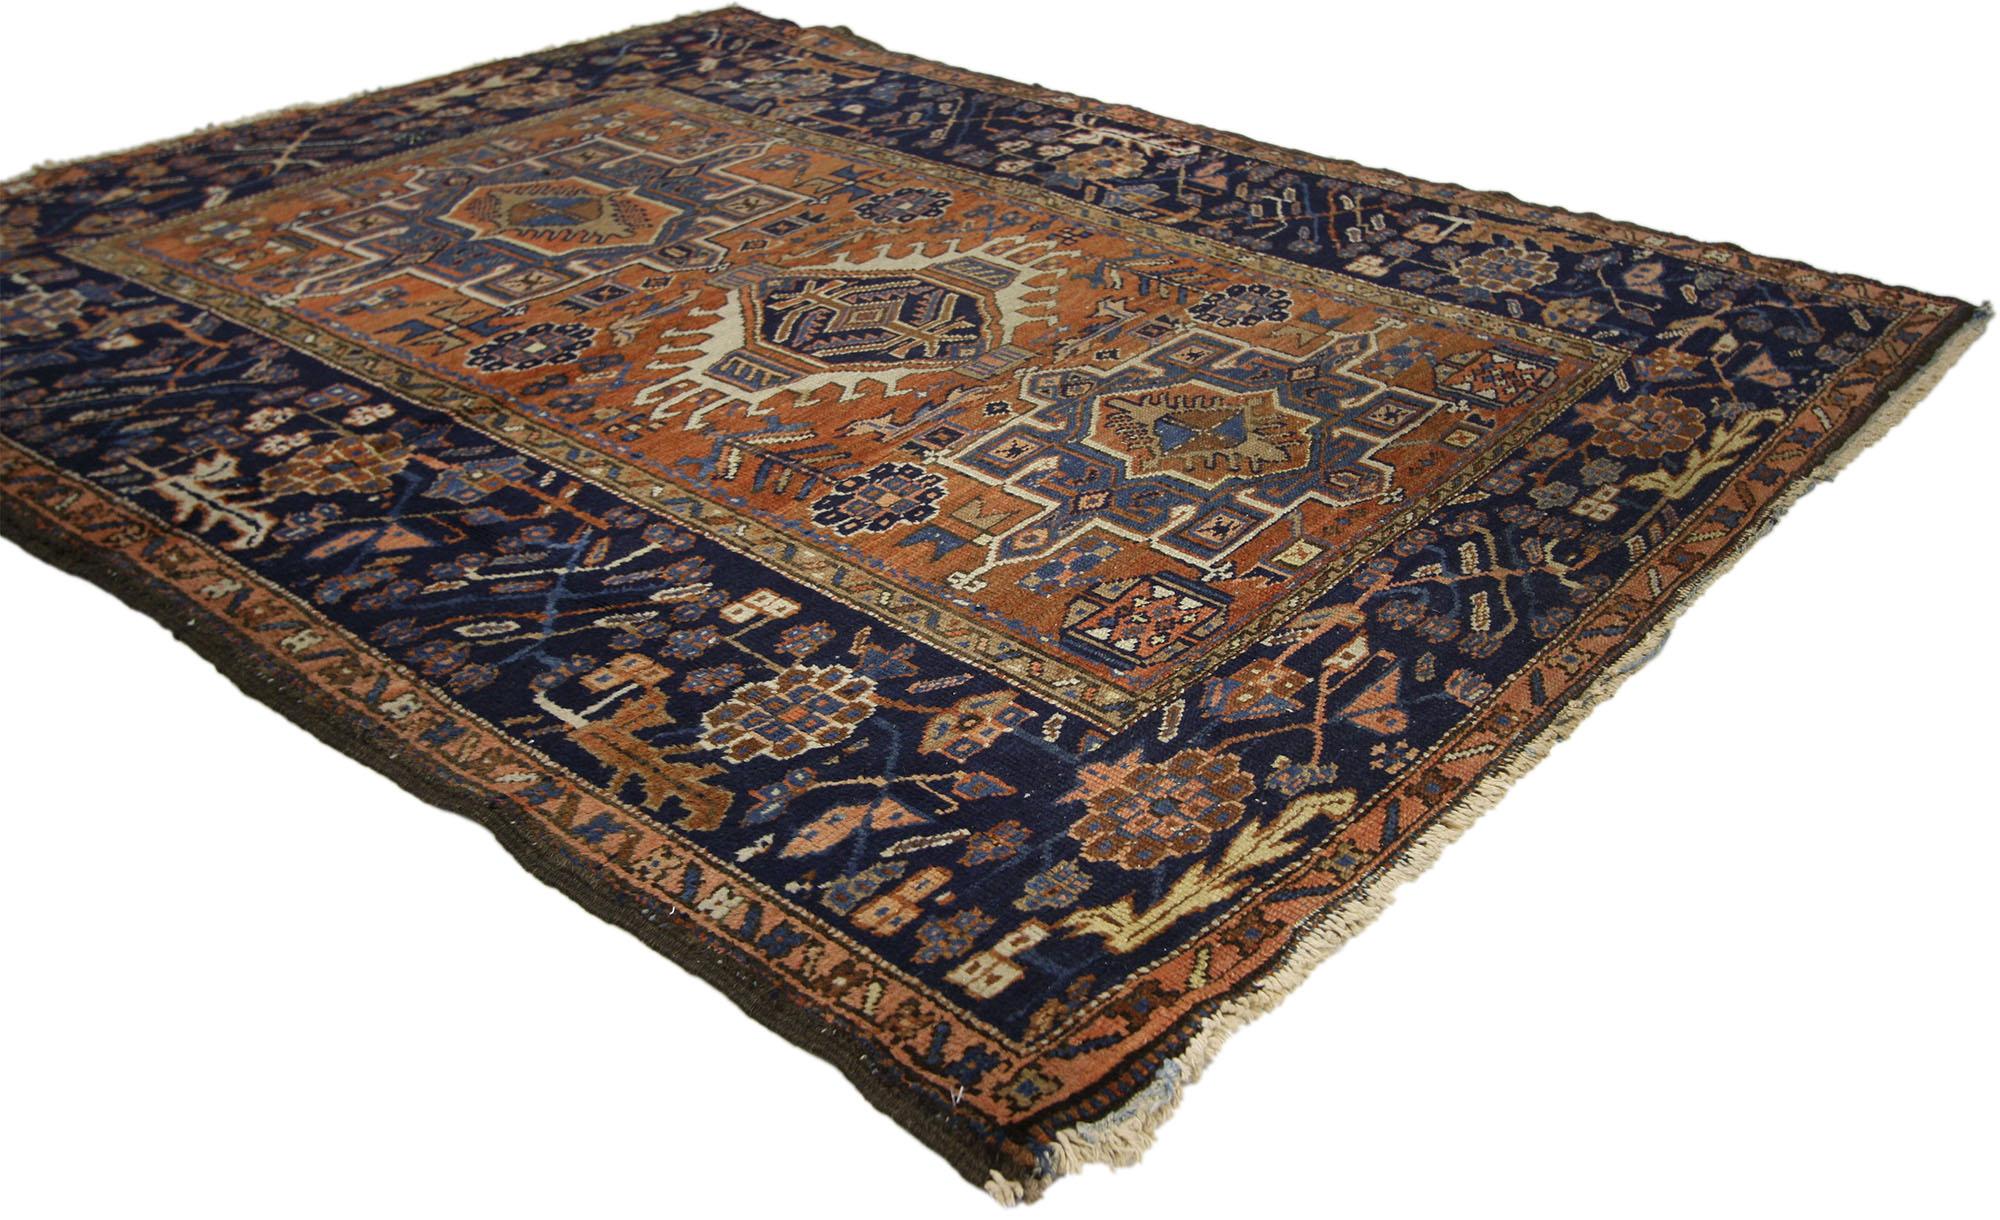 72988 Worn-In Distressed Antique Persian Karaja Heriz Rug with Rustic Style. This hand-knotted wool distressed antique Persian Karaja Heriz rug with Mid-Century Modern style features a latch-hook amulet flanked by two square cruciform medallions